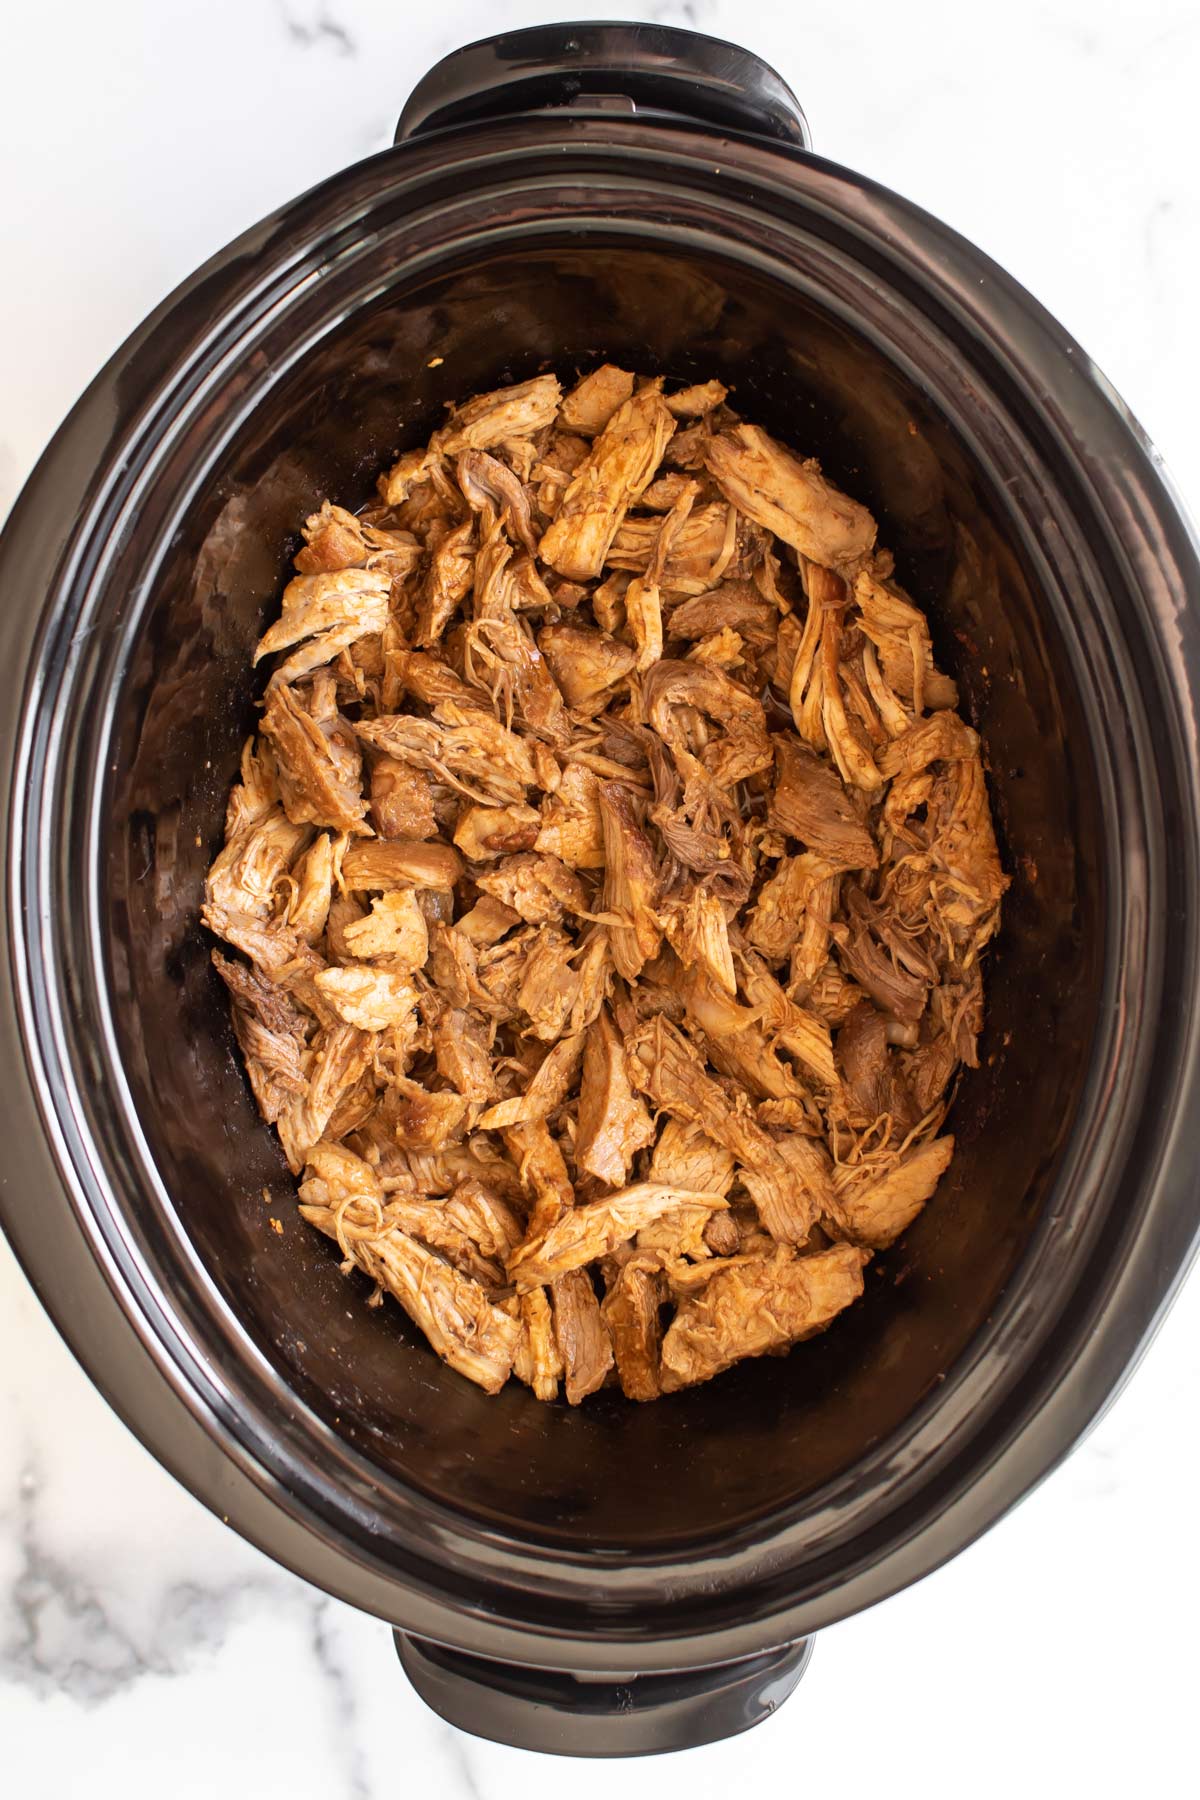 the pork after it's been shredded in the slow cooker.